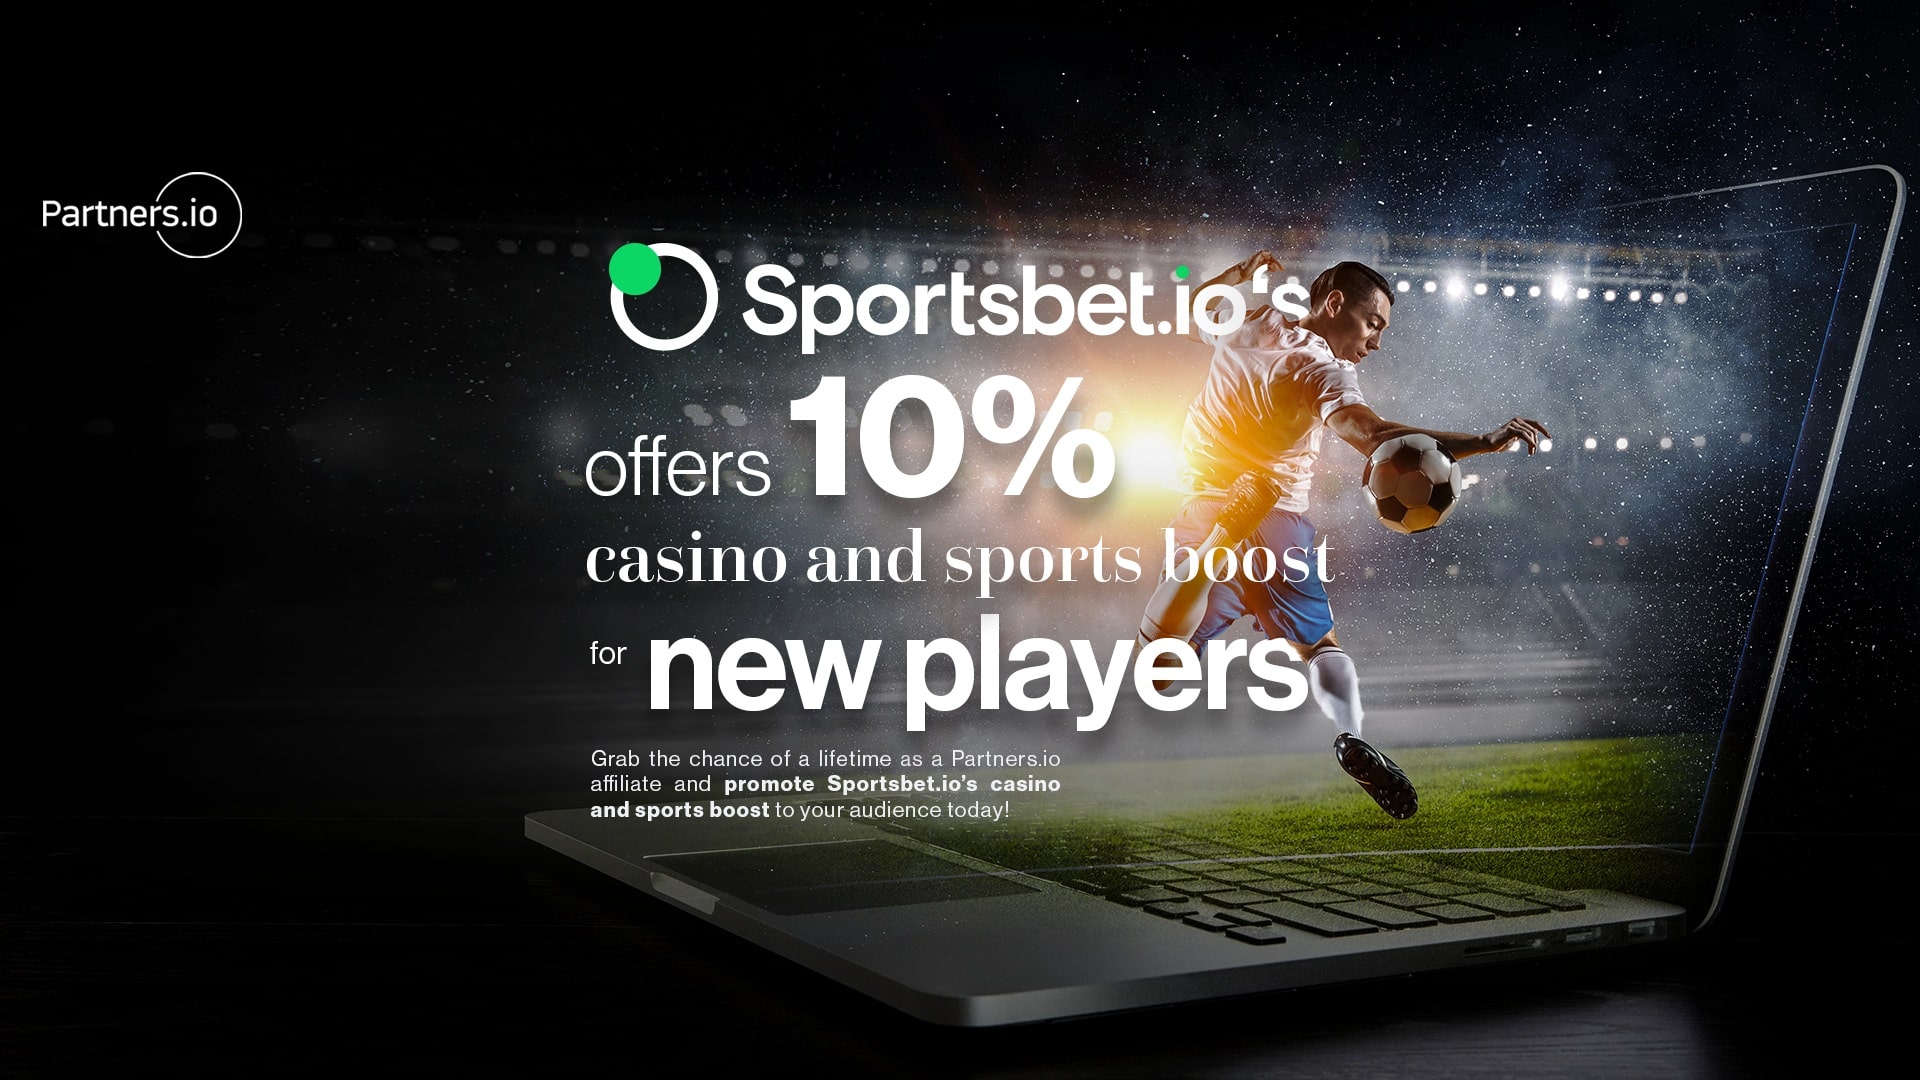 Sportsbet.io offers a 10% casino and sports boost for new players